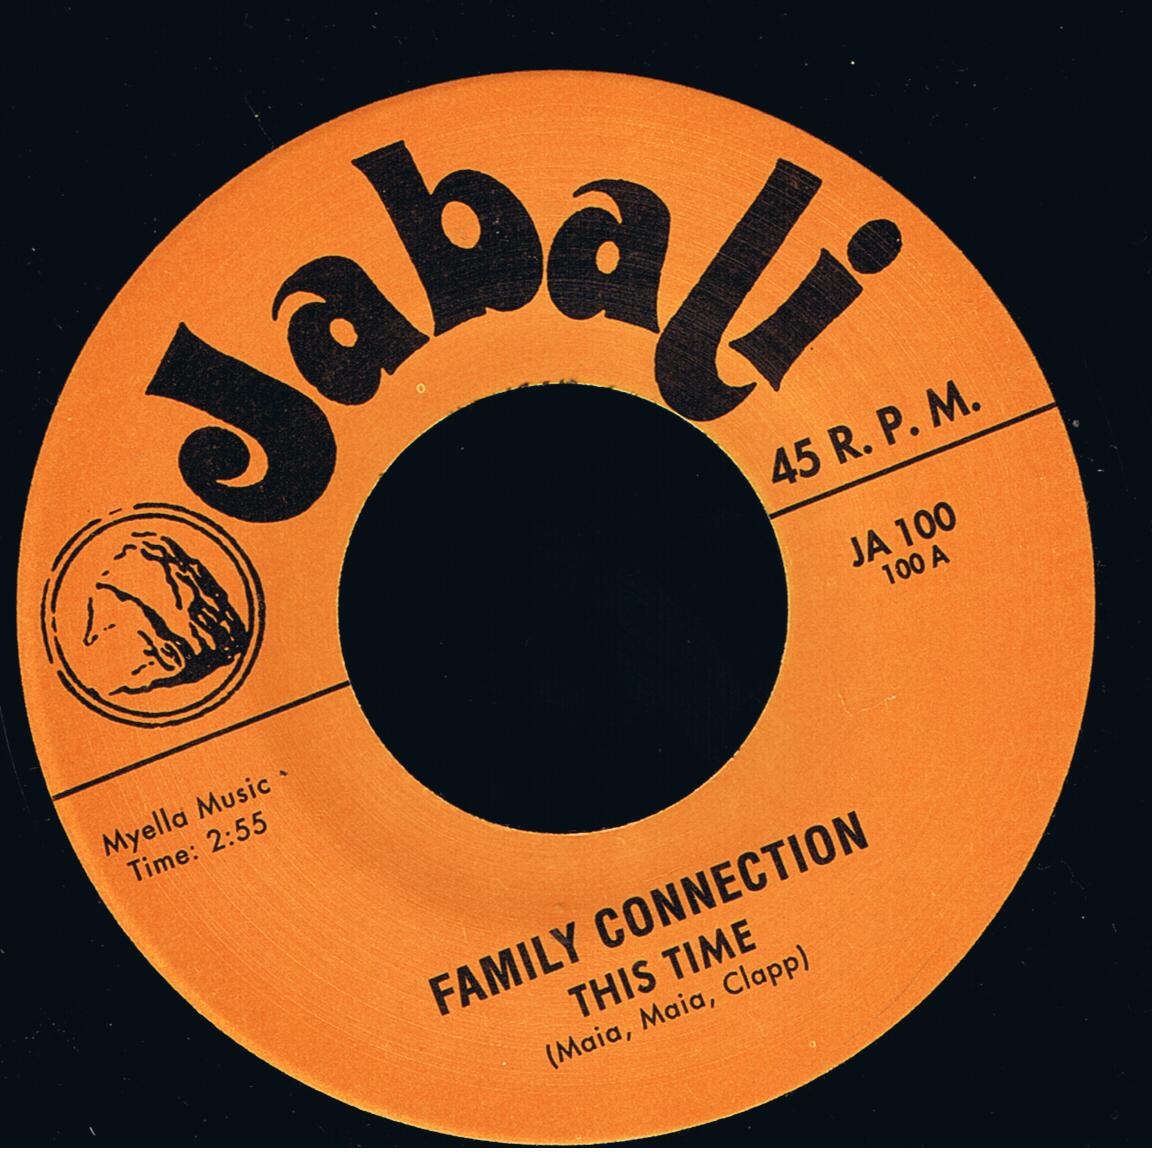 Family Connection - This Time / Lost Her Love (7")